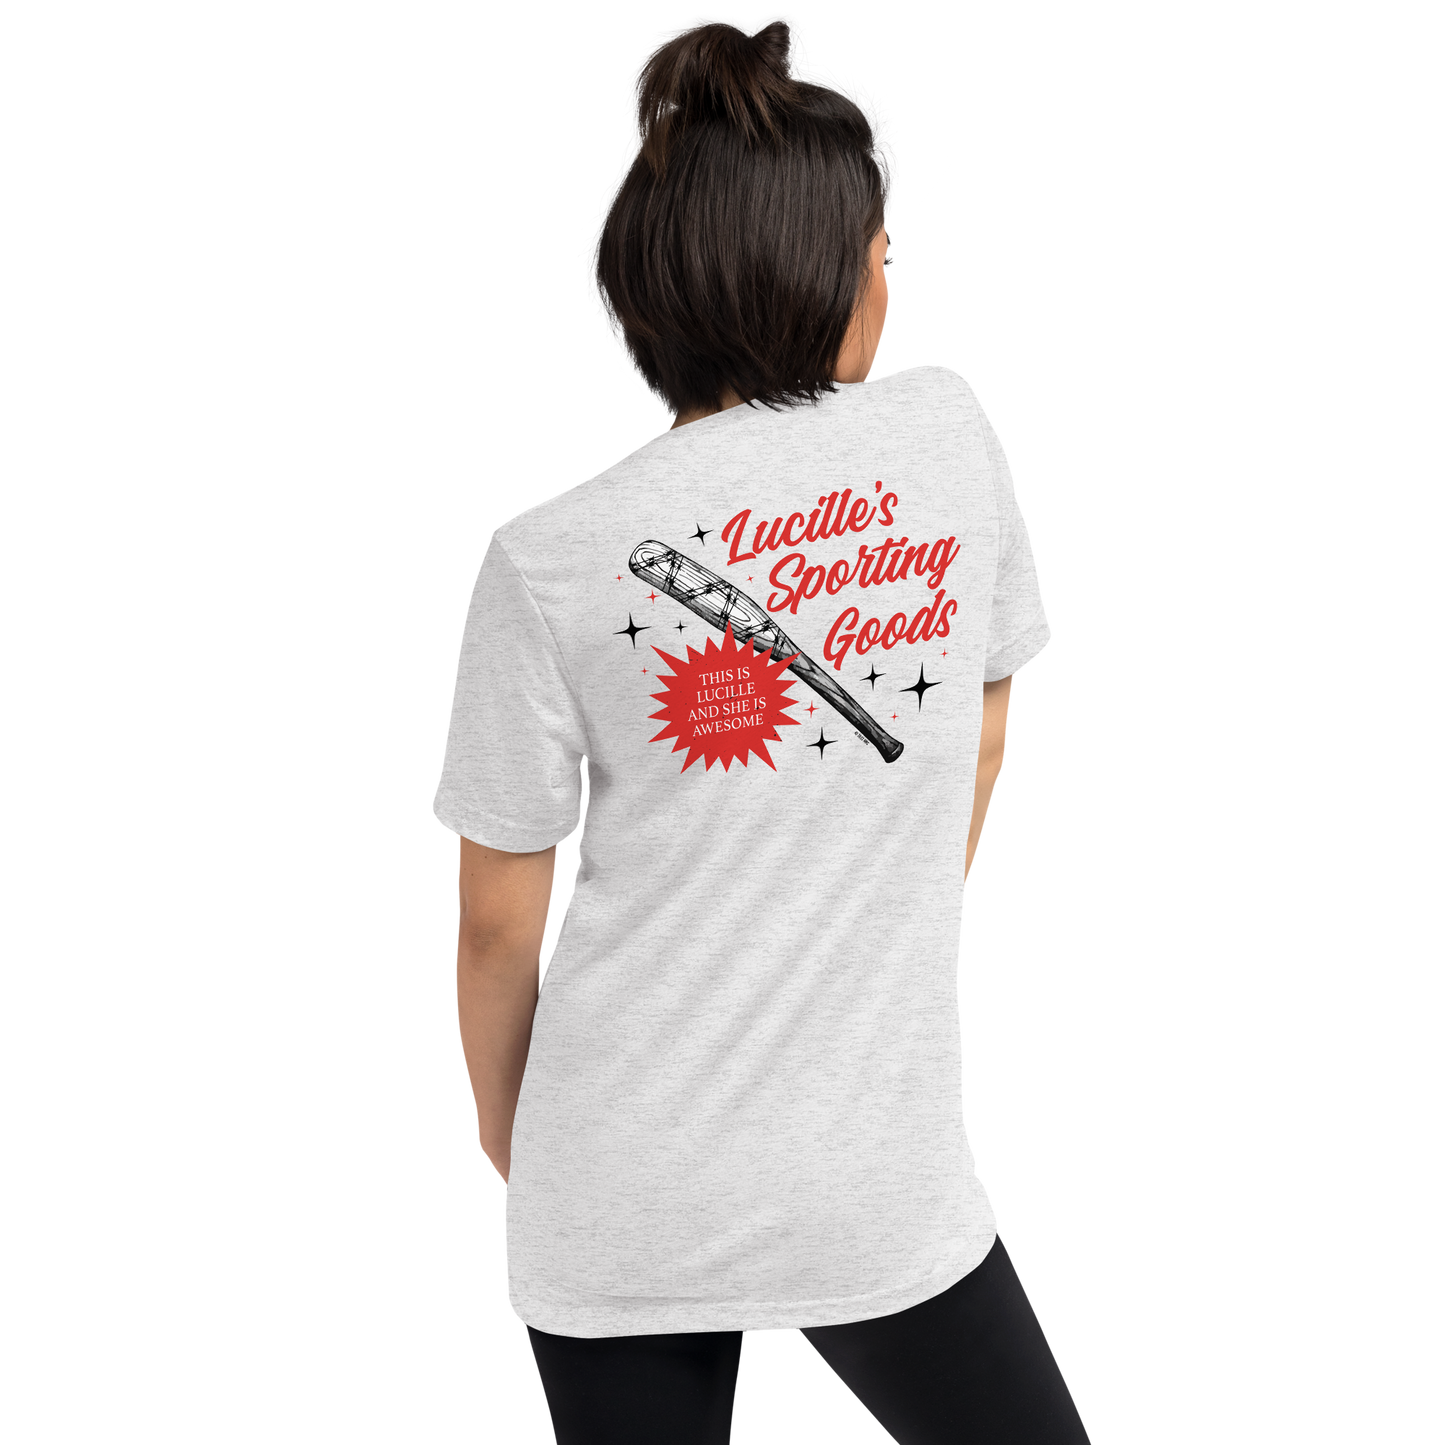 The Walking Dead Lucille's Sporting Goods Adult Tri-Blend T-Shirt